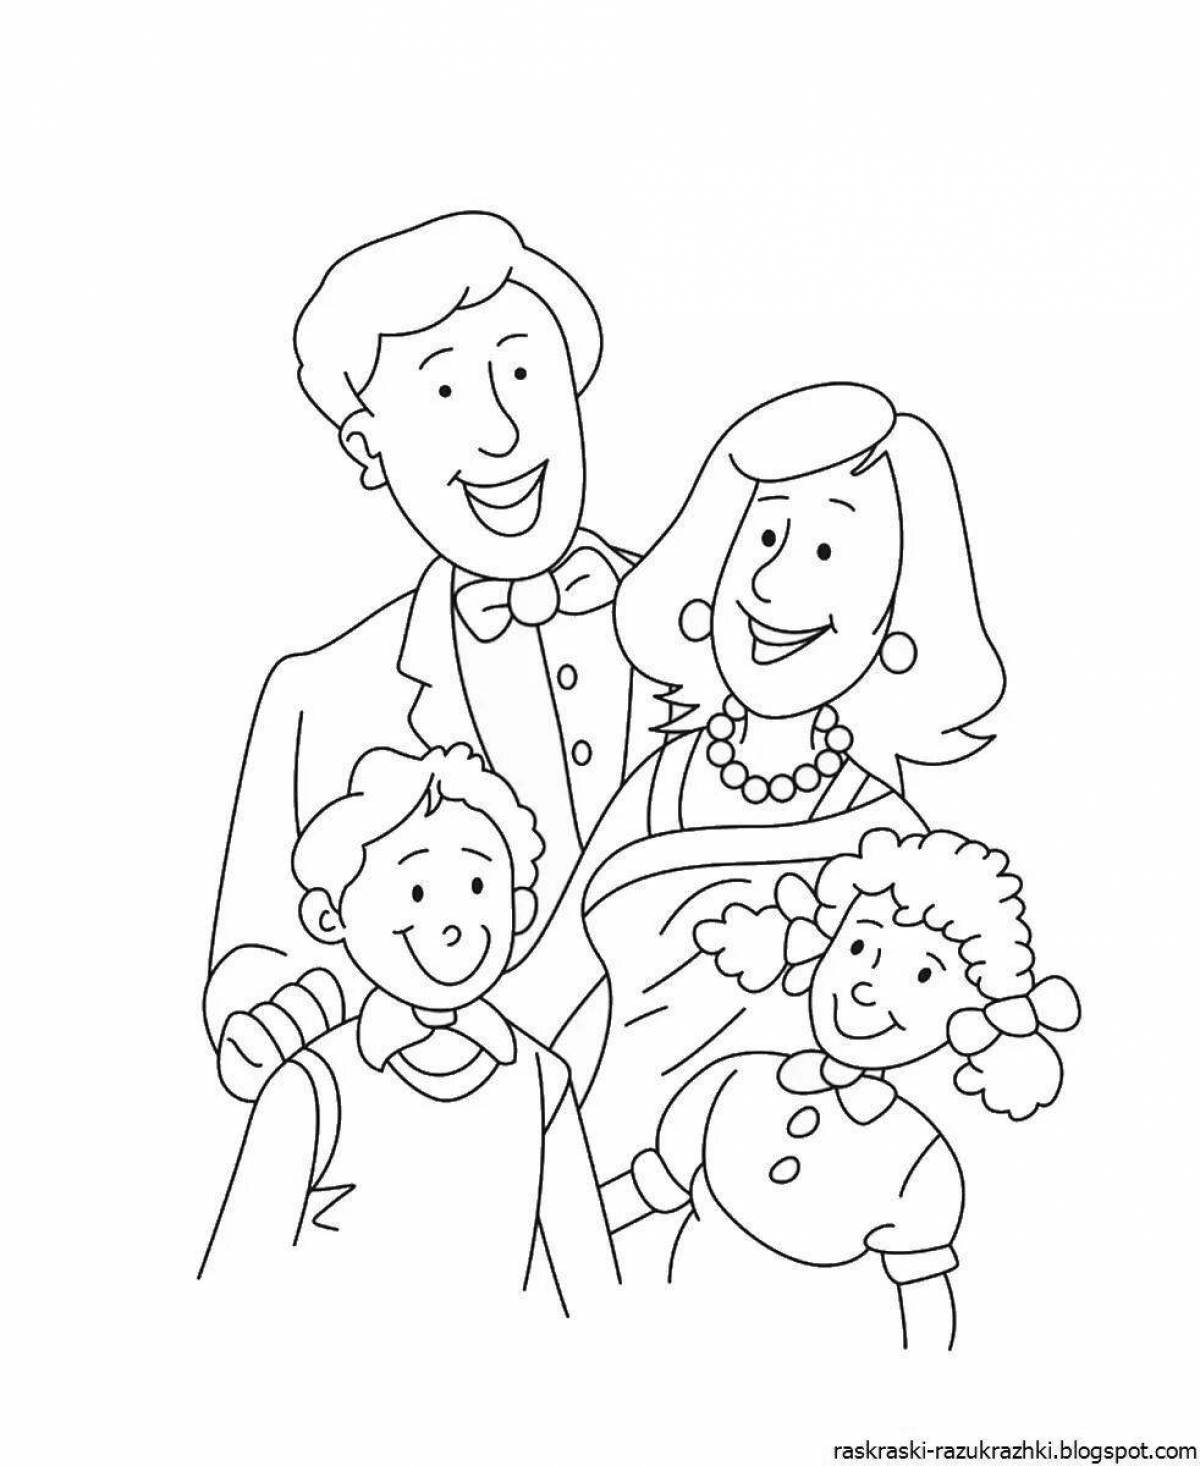 Colorful mom and dad coloring book for kids